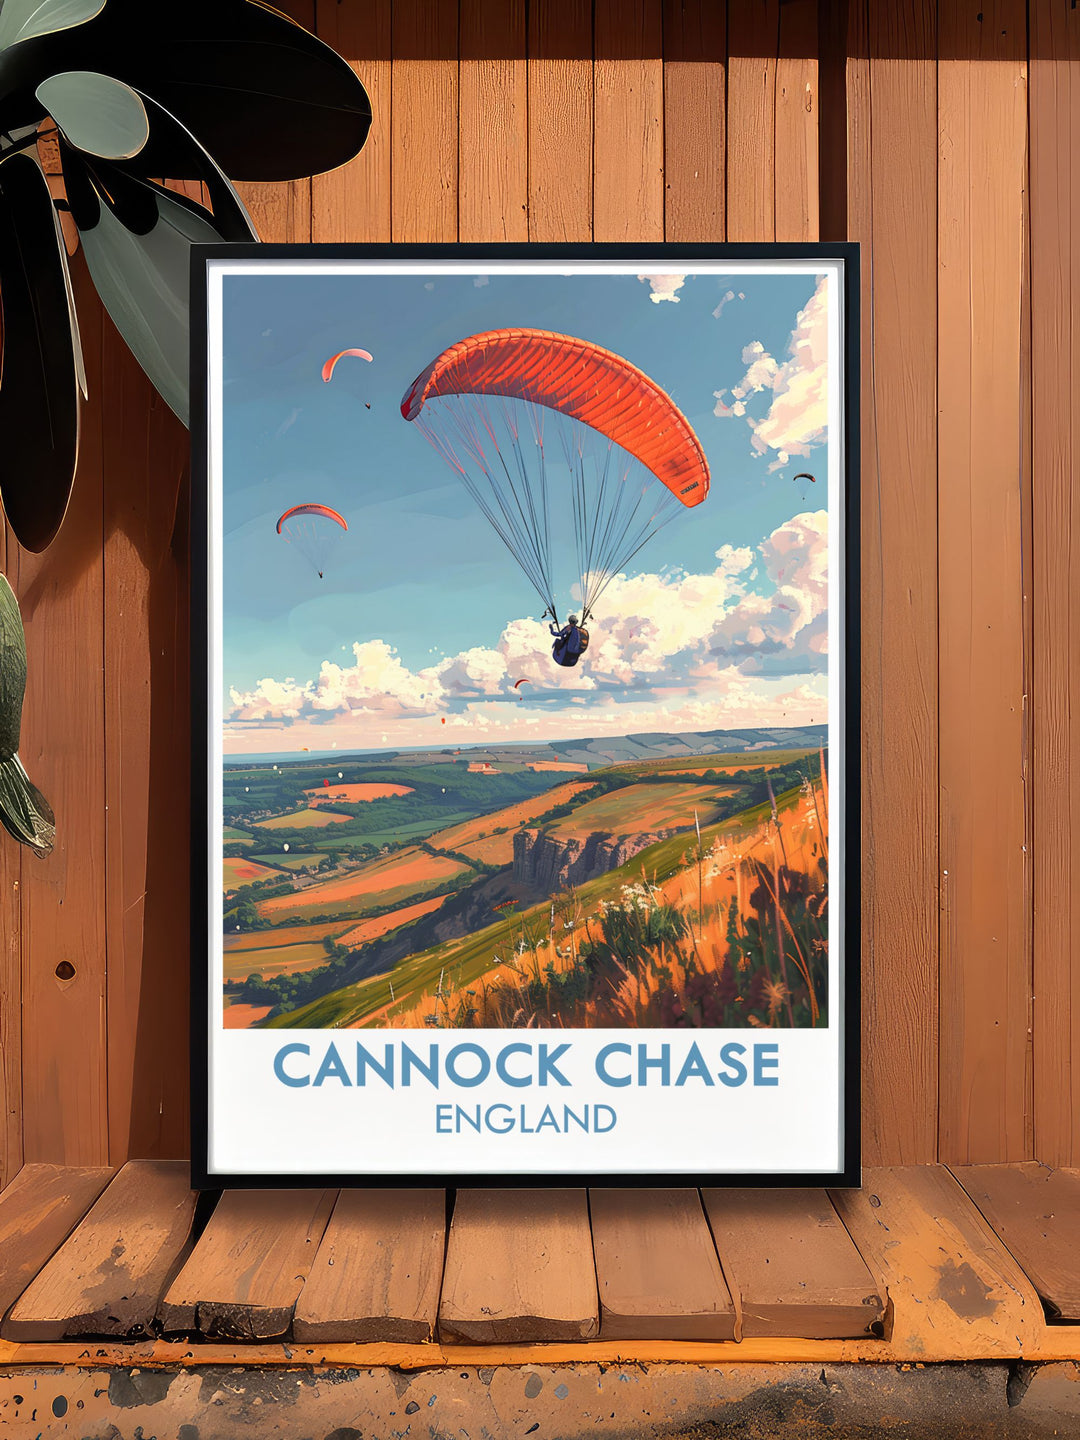 The Chase vintage print brings a classic touch to your decor. Featuring the lush woodlands and diverse wildlife of Cannock Chase, this artwork is perfect for those who love British nature. An ideal gift for nature lovers and outdoor enthusiasts.